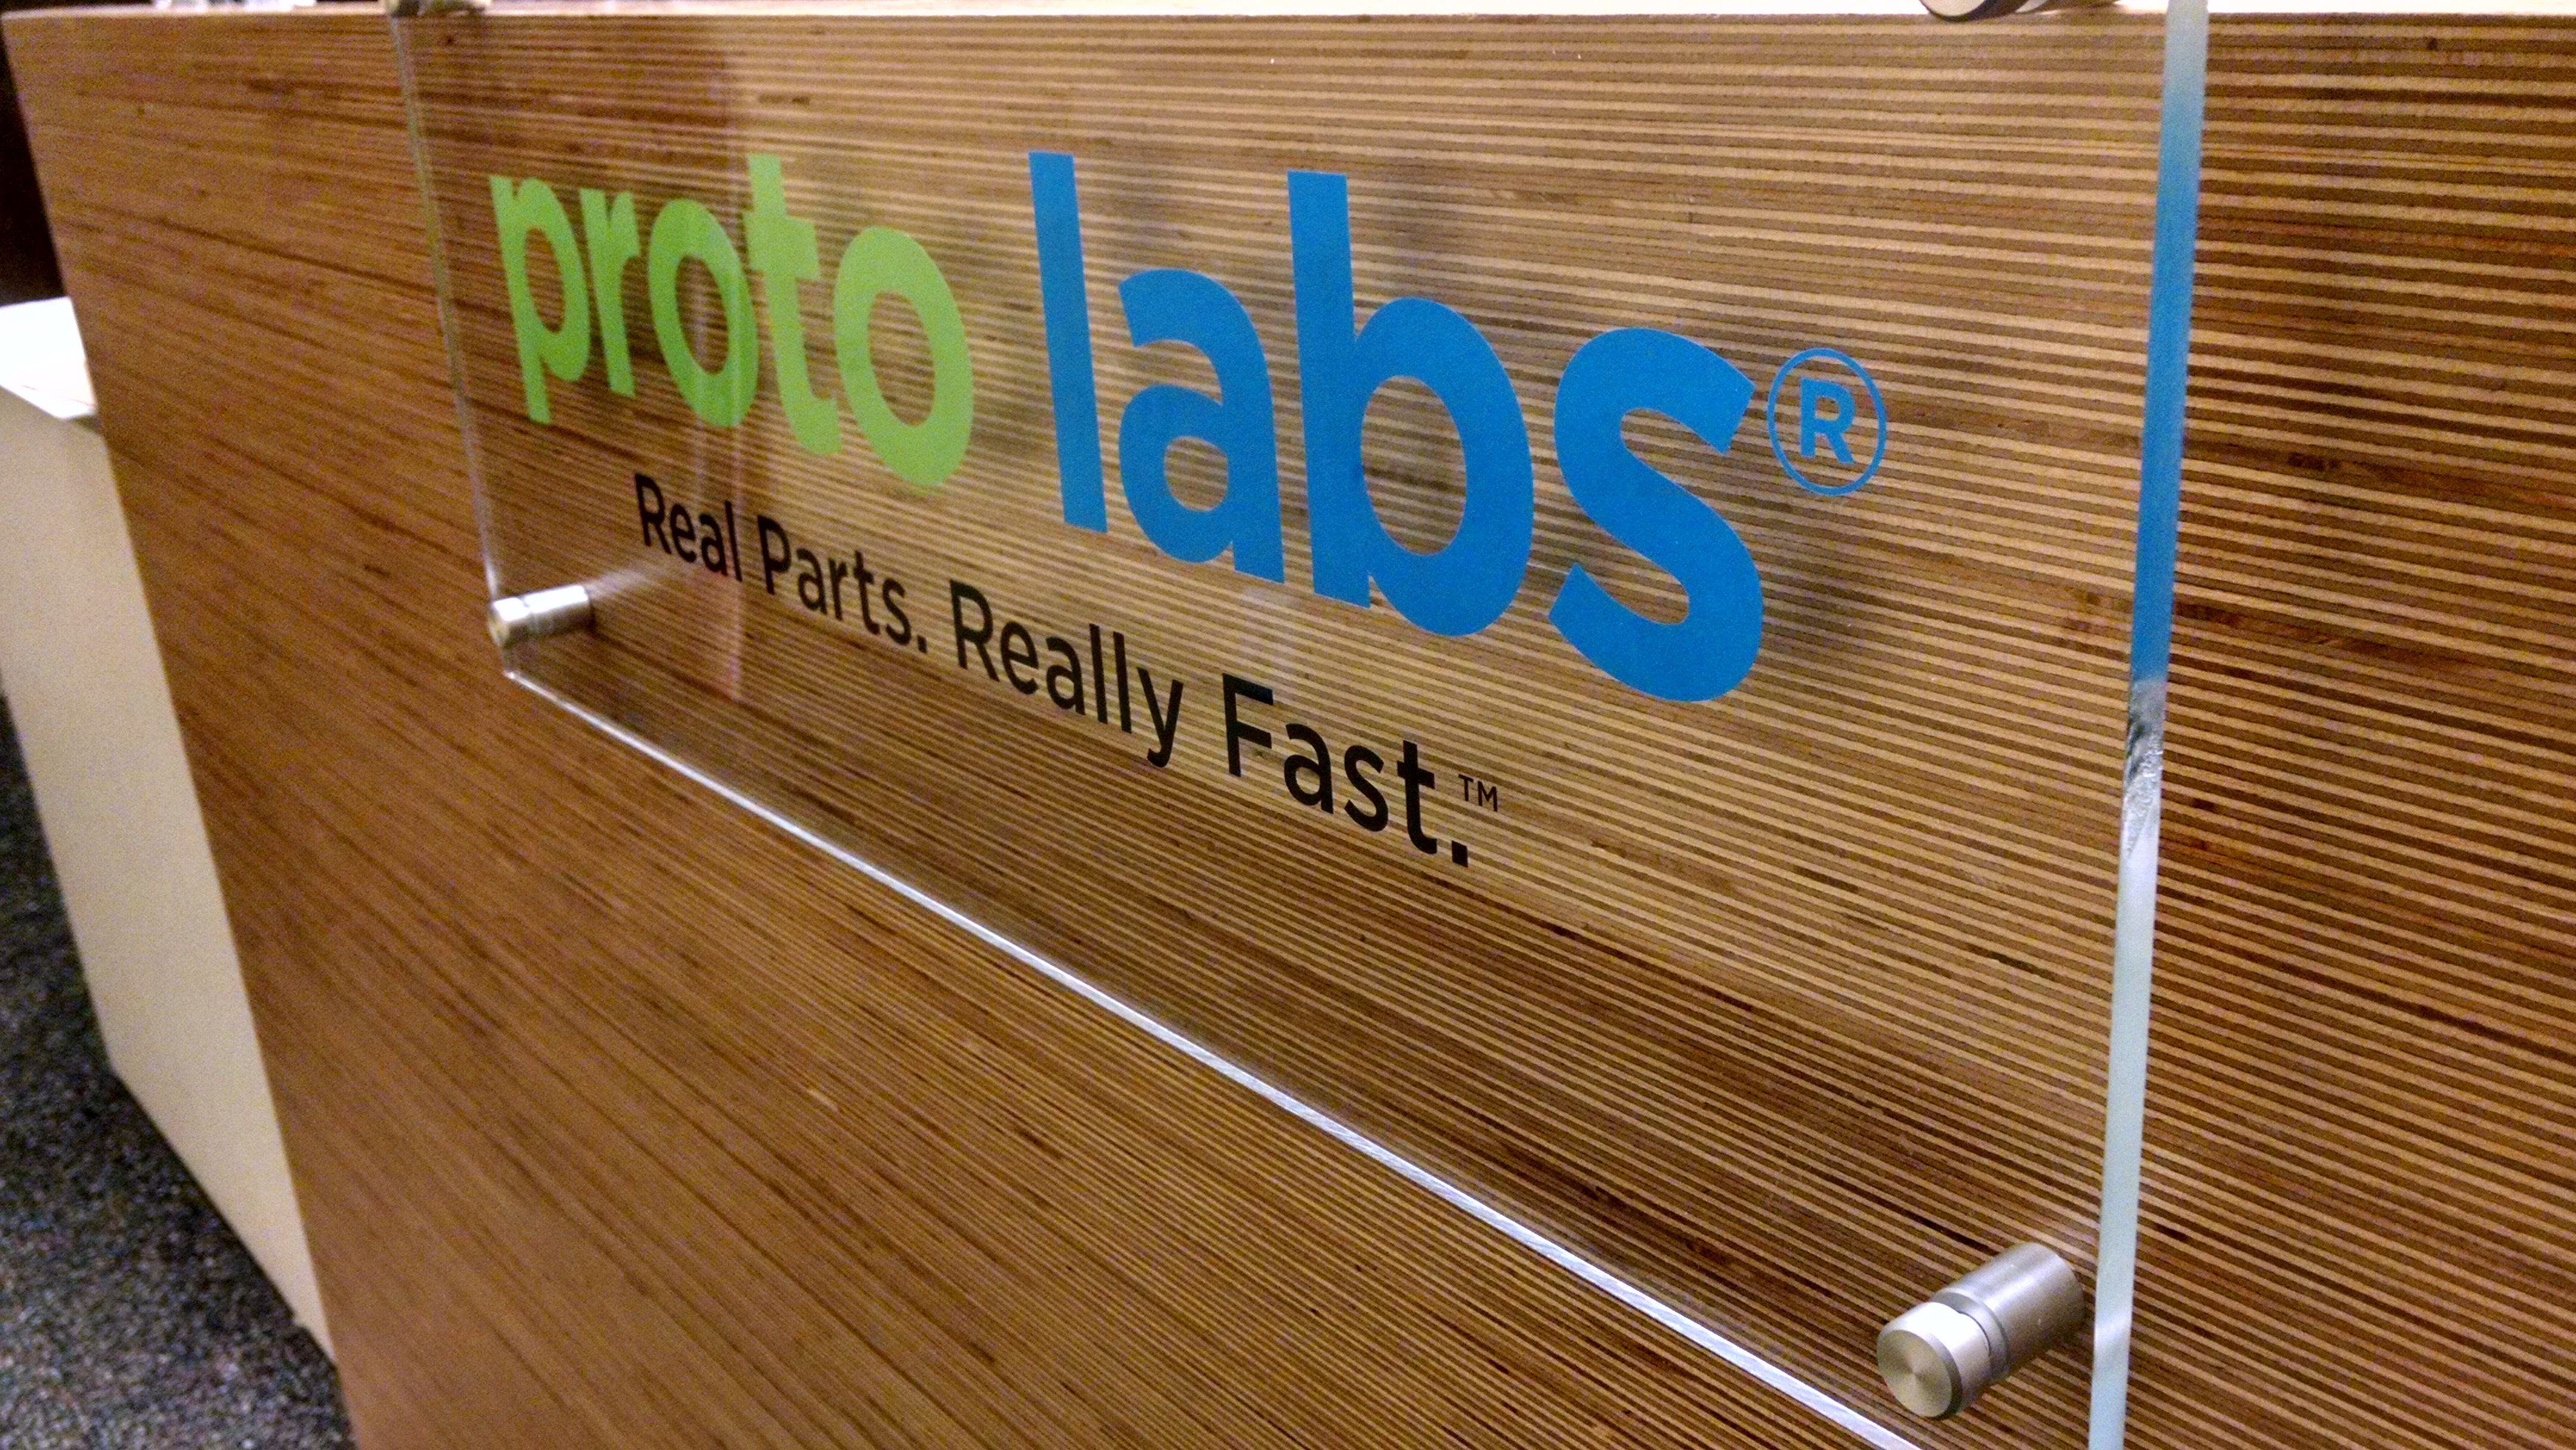 Download Acrylic Lobby Sign in Maple Plain, MN for Proto Labs